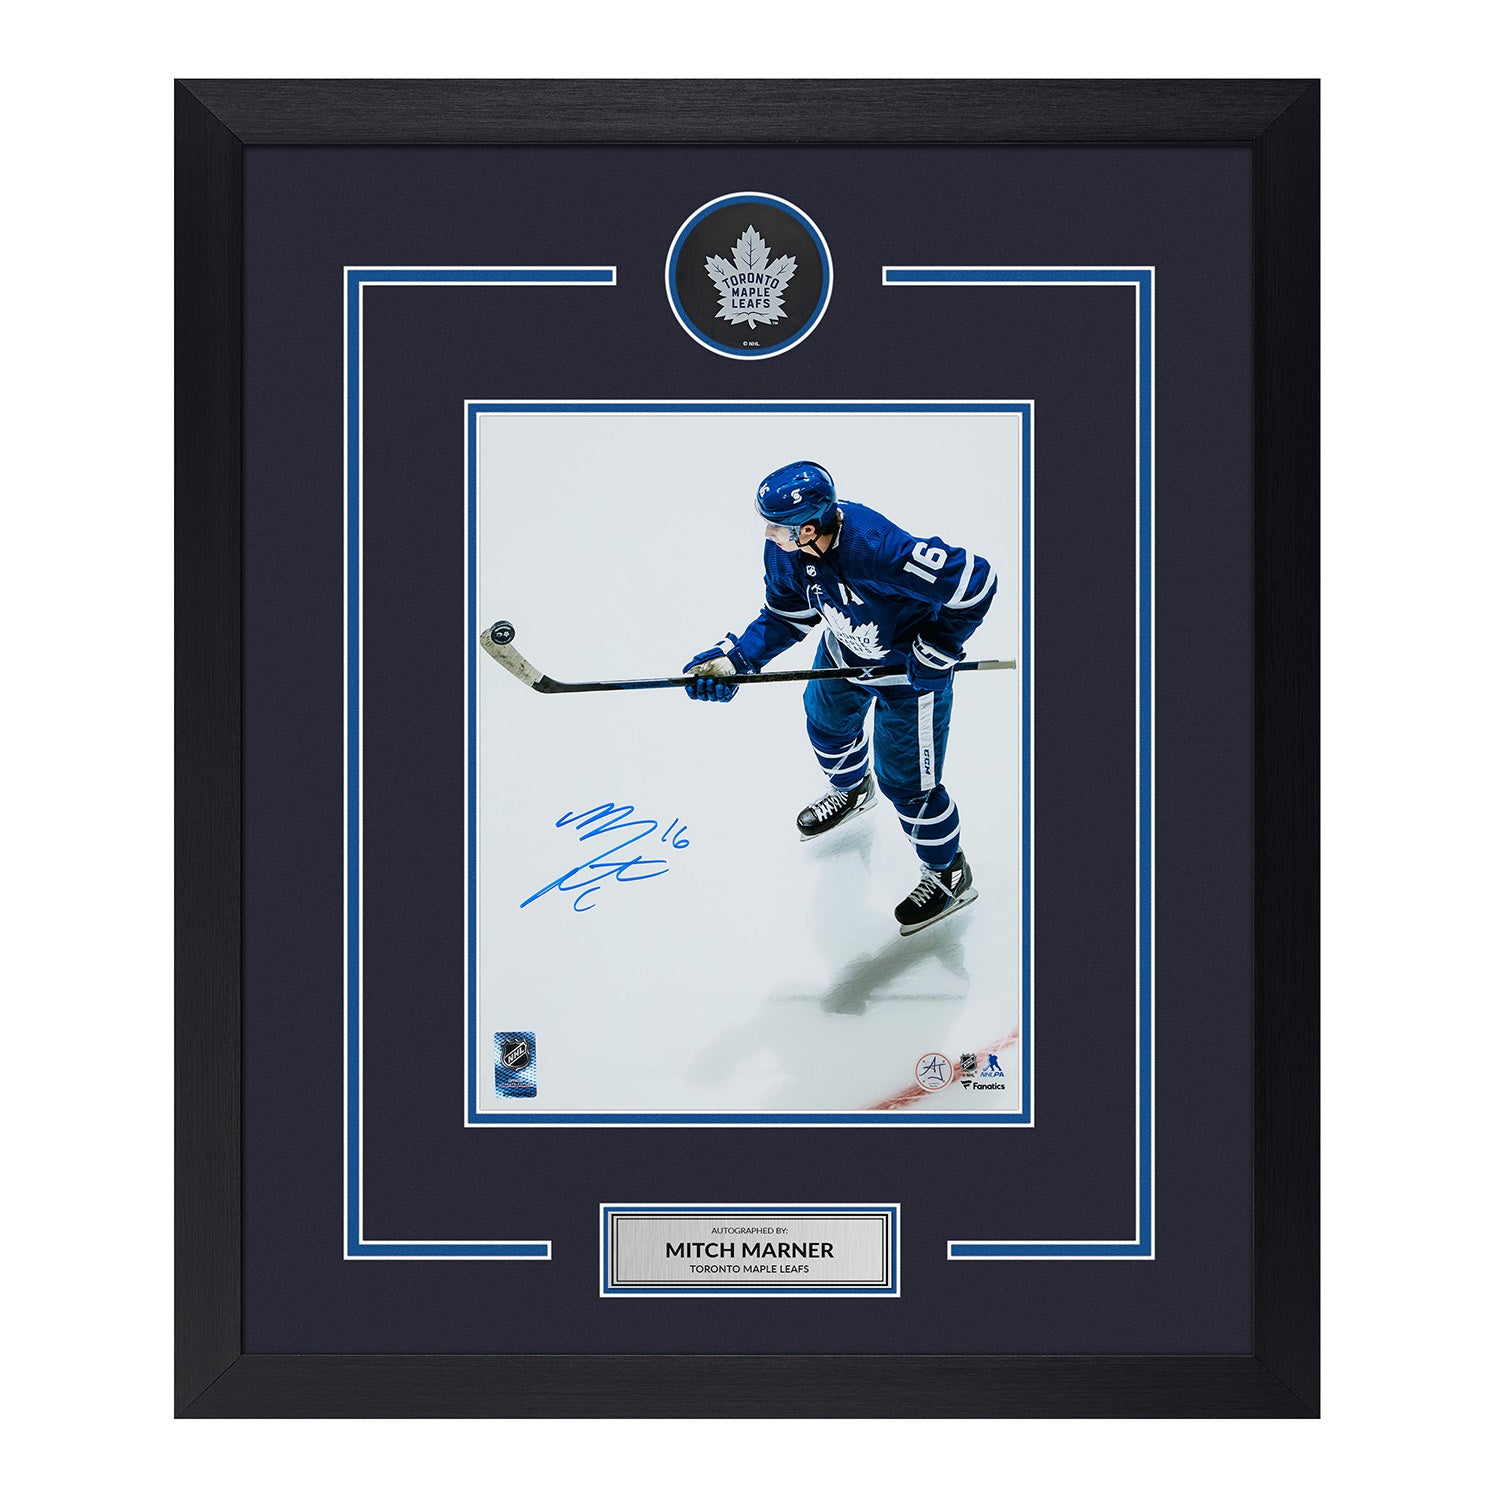 Mitch Marner Signed Toronto Maple Leafs Puck Display 23x27 Frame